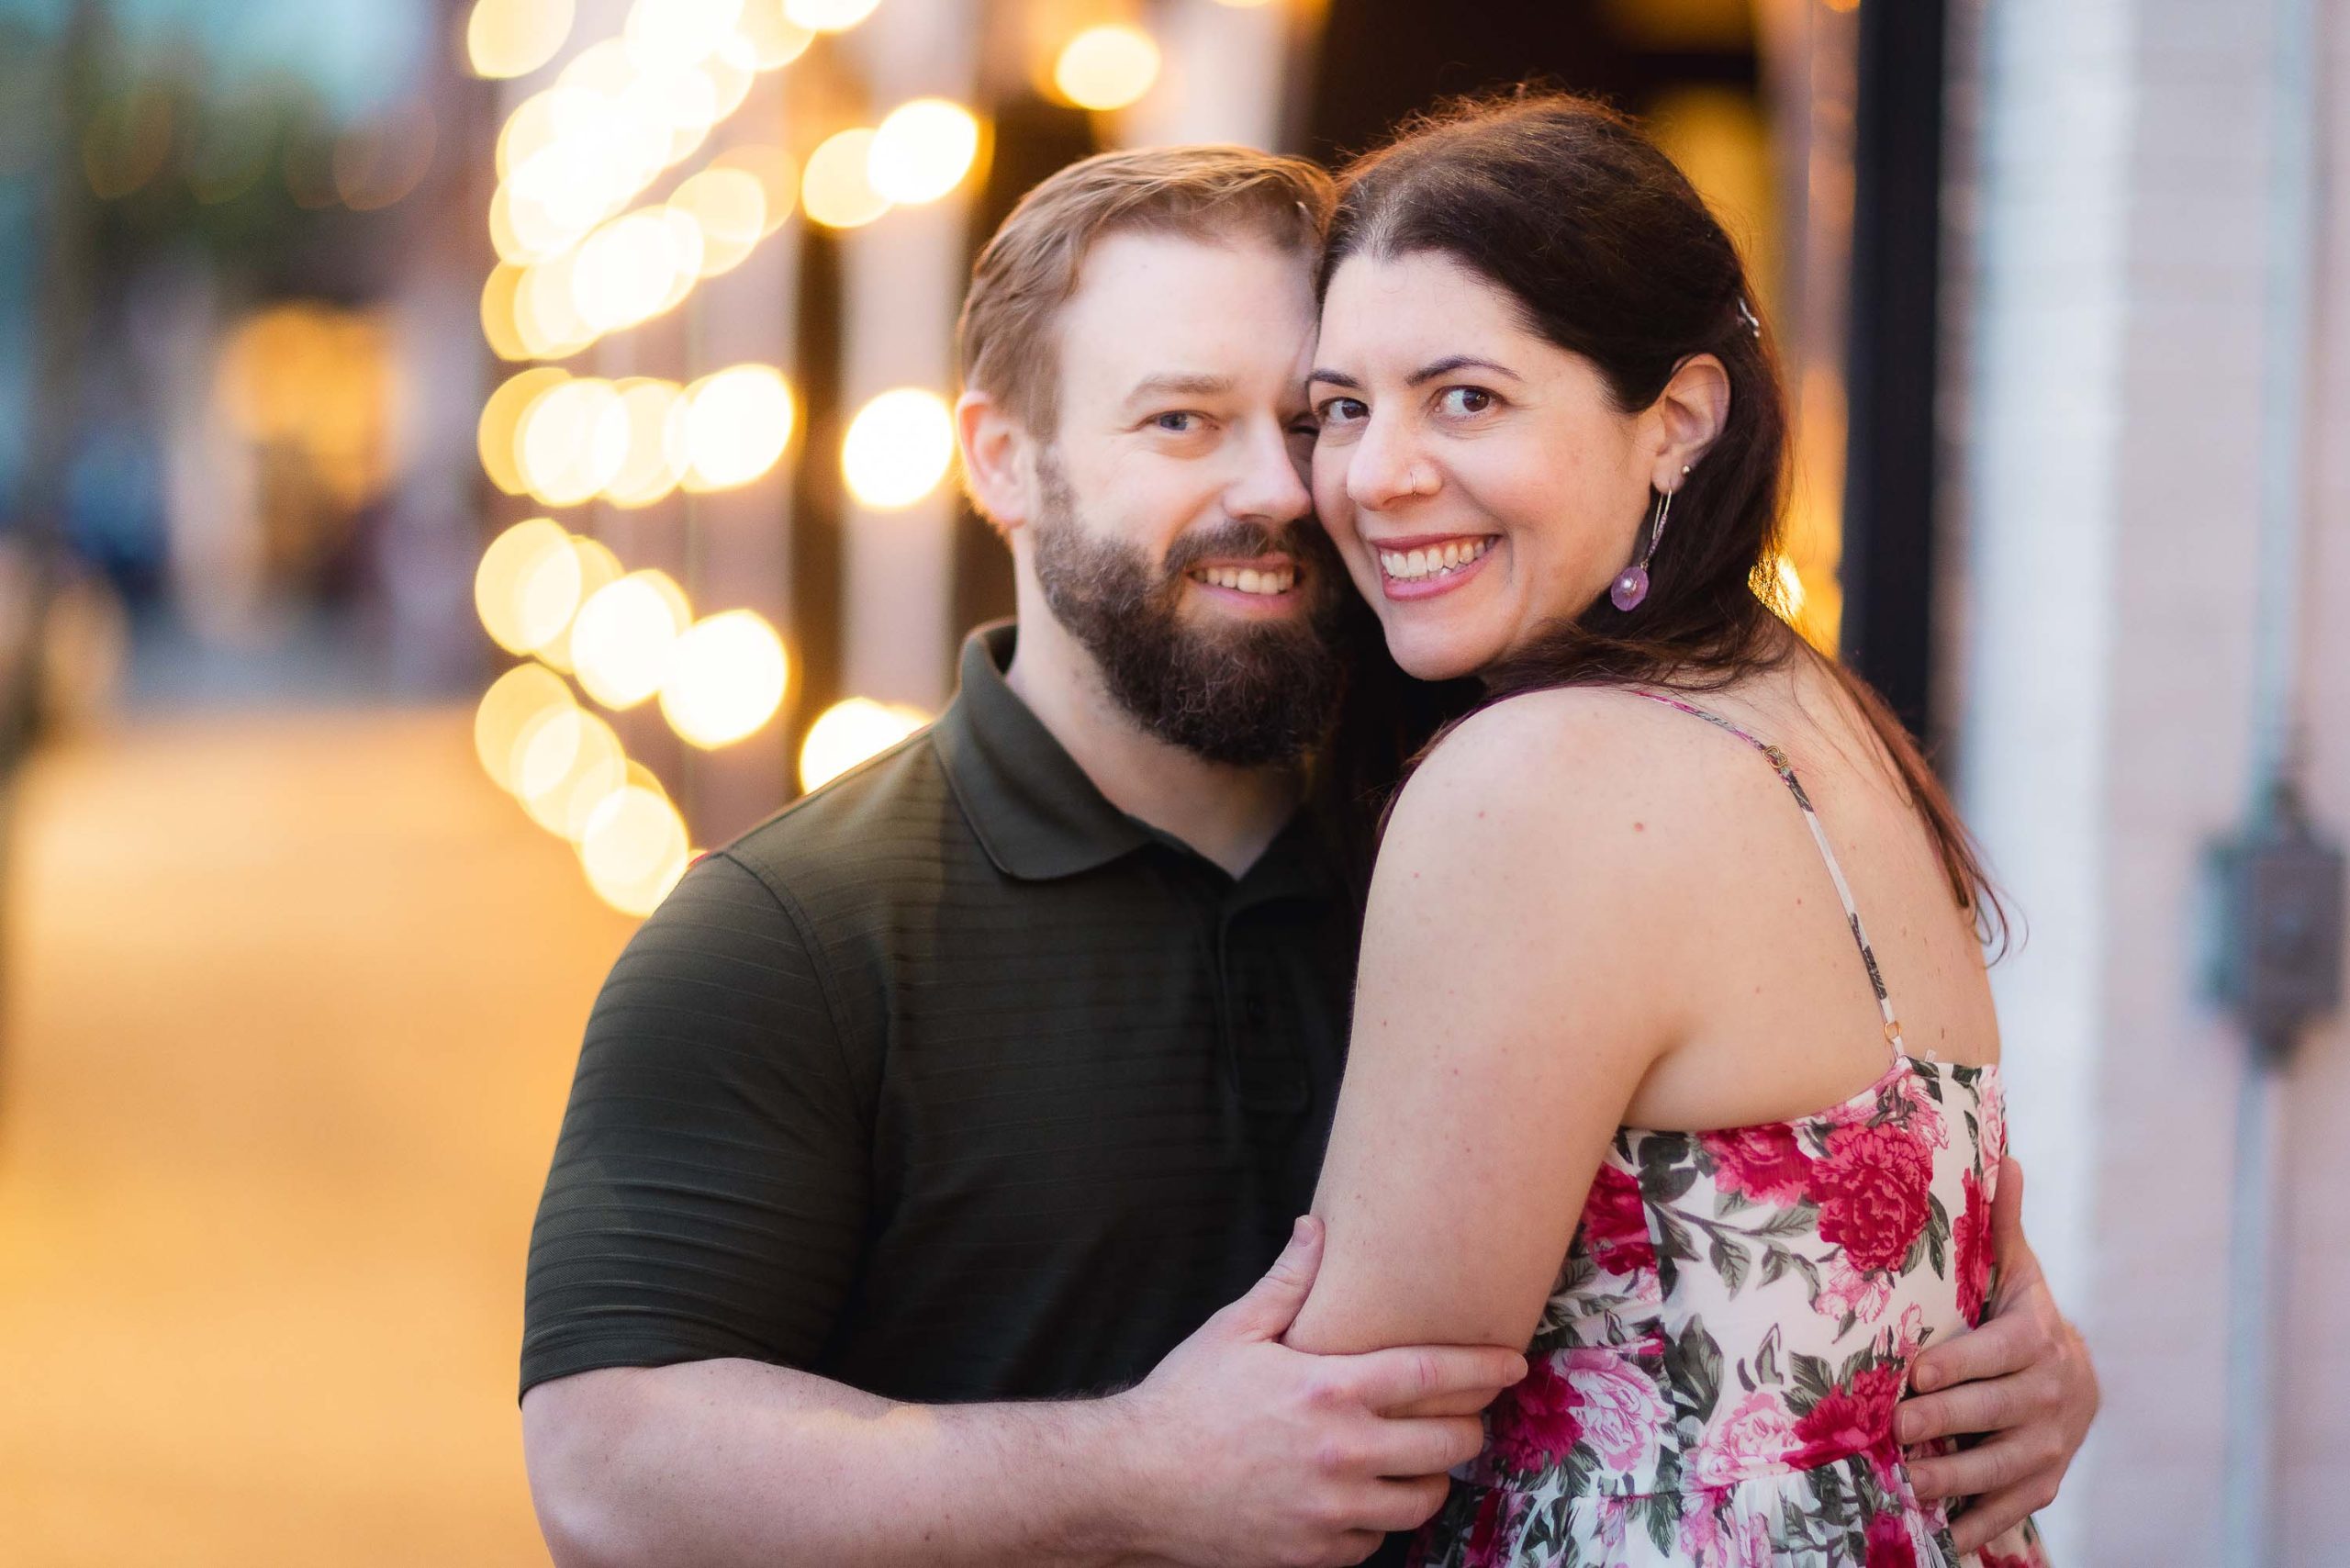 A portrait of an engaged couple embracing in front of a street light during their engagement photos session in downtown Annapolis.